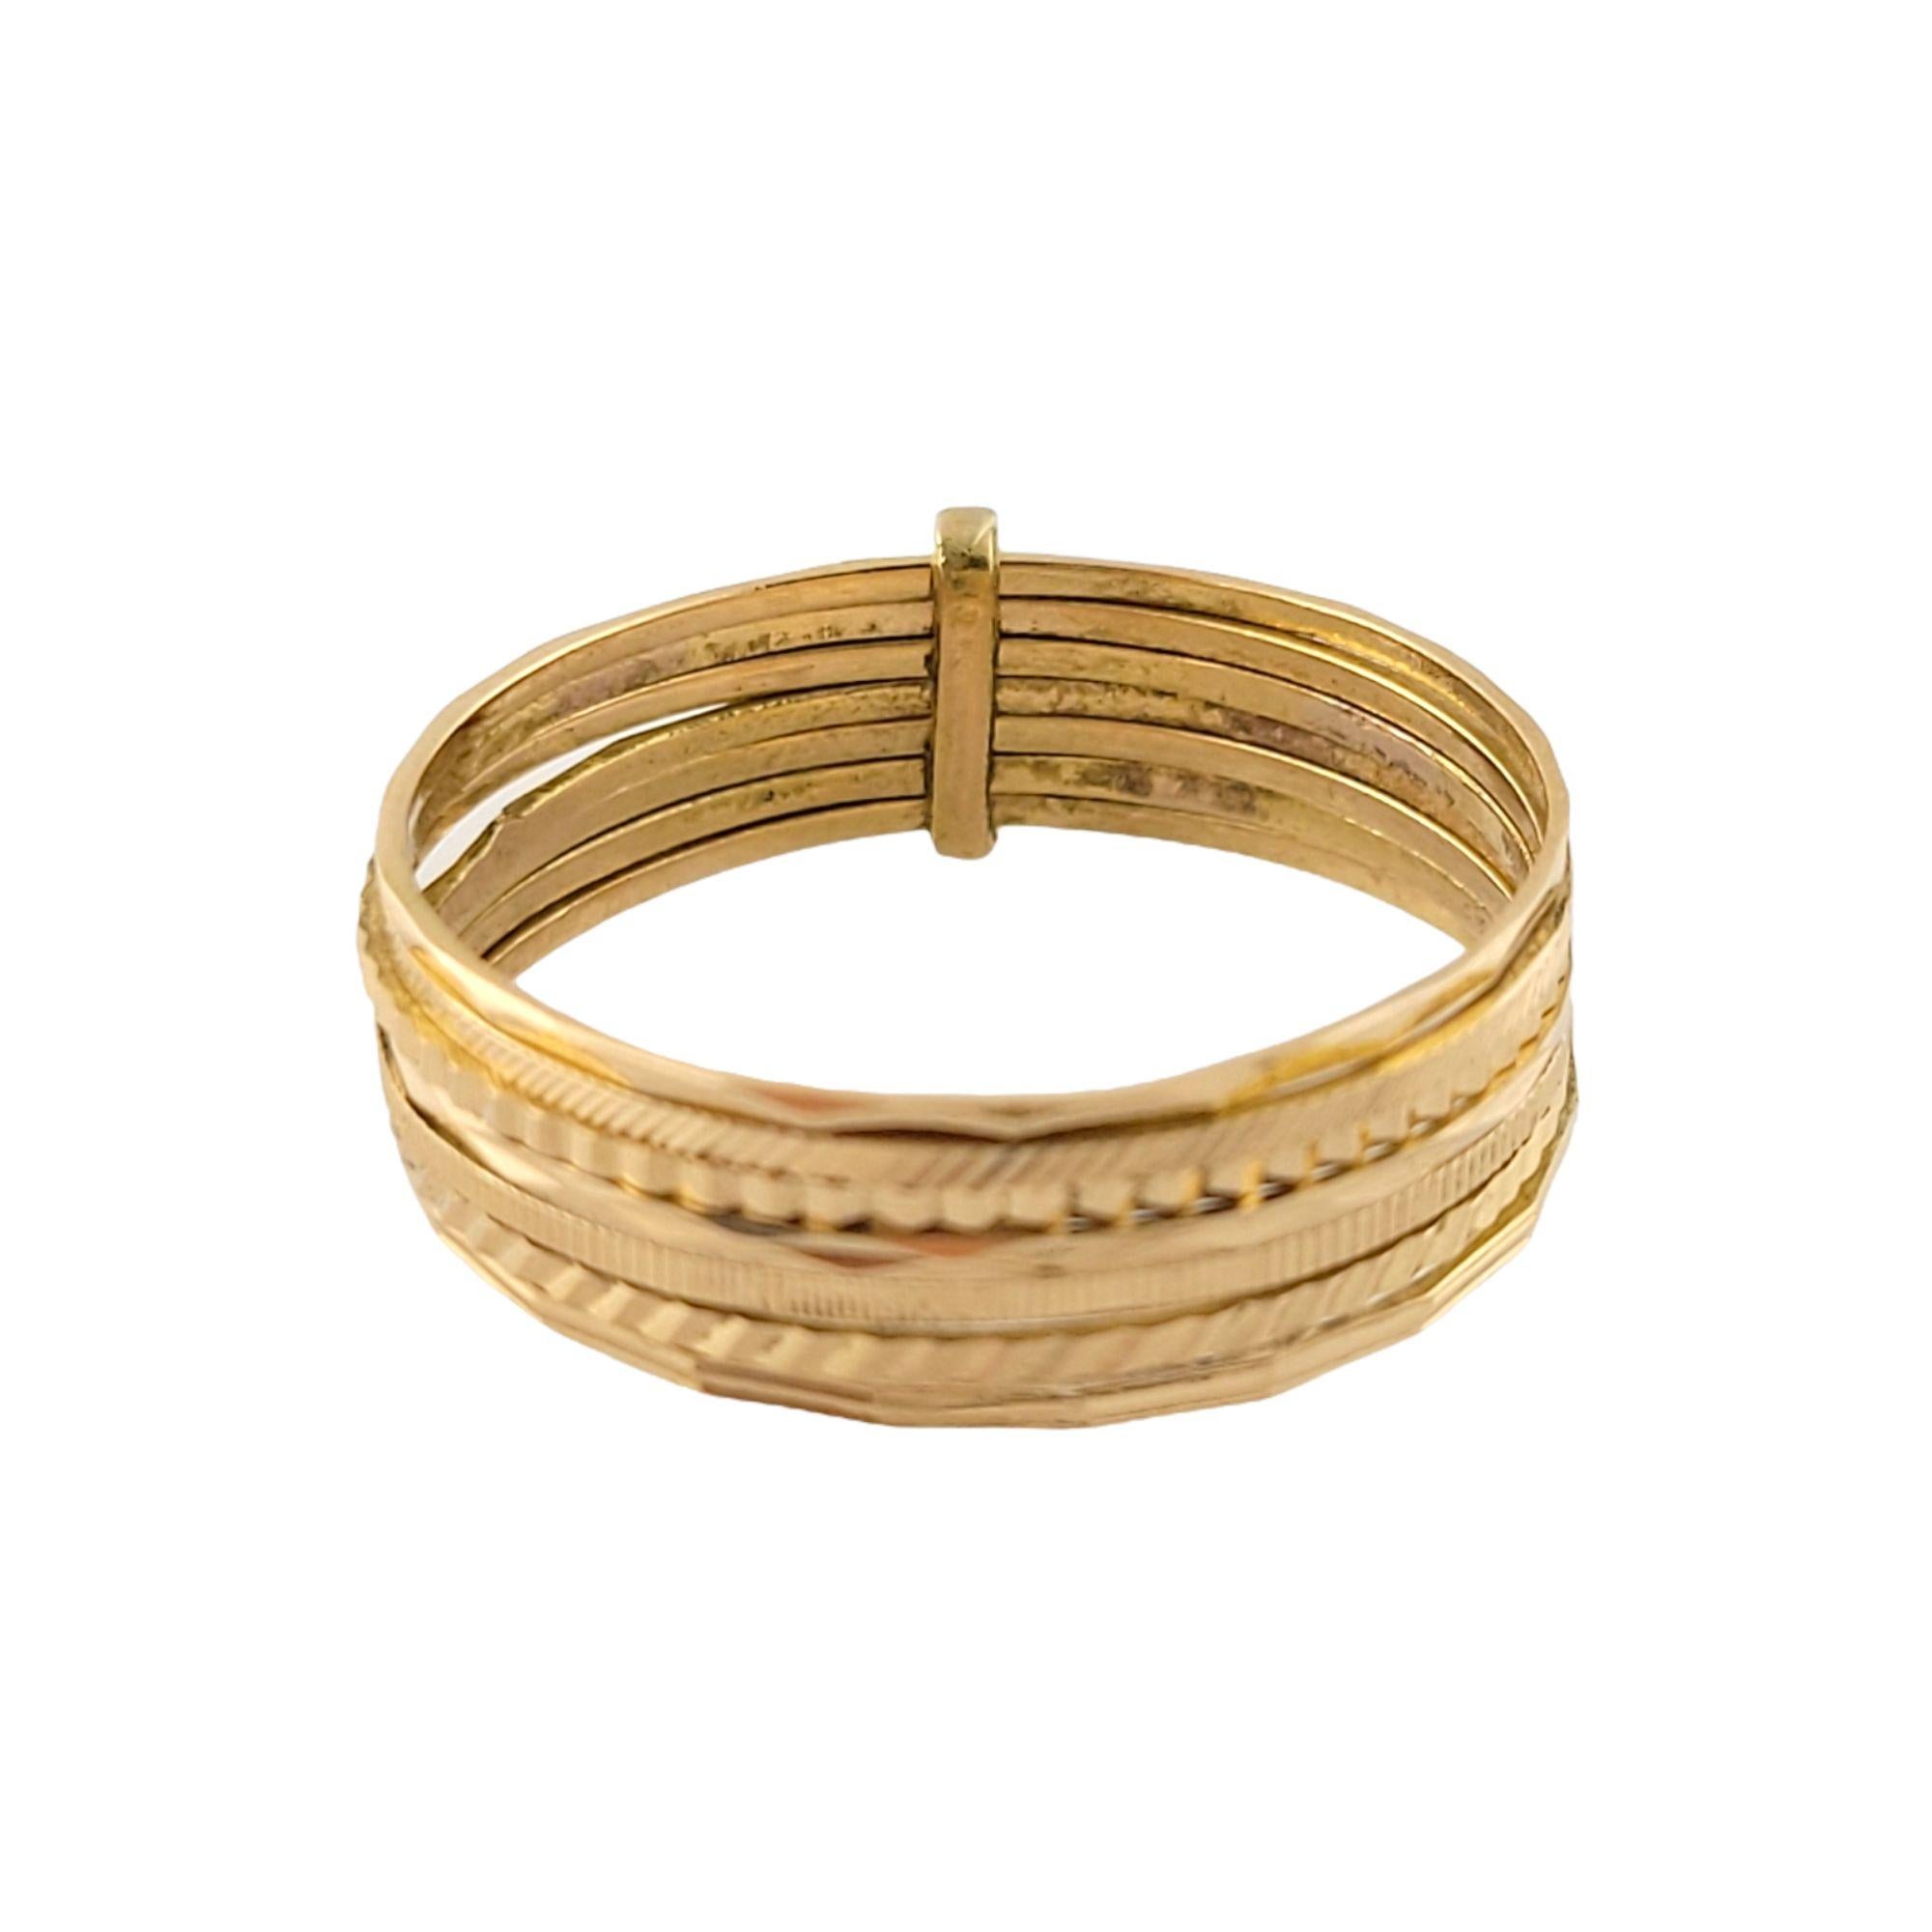 Vintage 18K Yellow Gold Multiple Texture Rings

Beautiful 18K yellow gold ring that features multiple thin textured rings tethered together by a gold link.

Shank: 11mm

Weight: 3.5 gr / 2.2 dwt

Size: 11.5

Tested 18K

Very good condition,